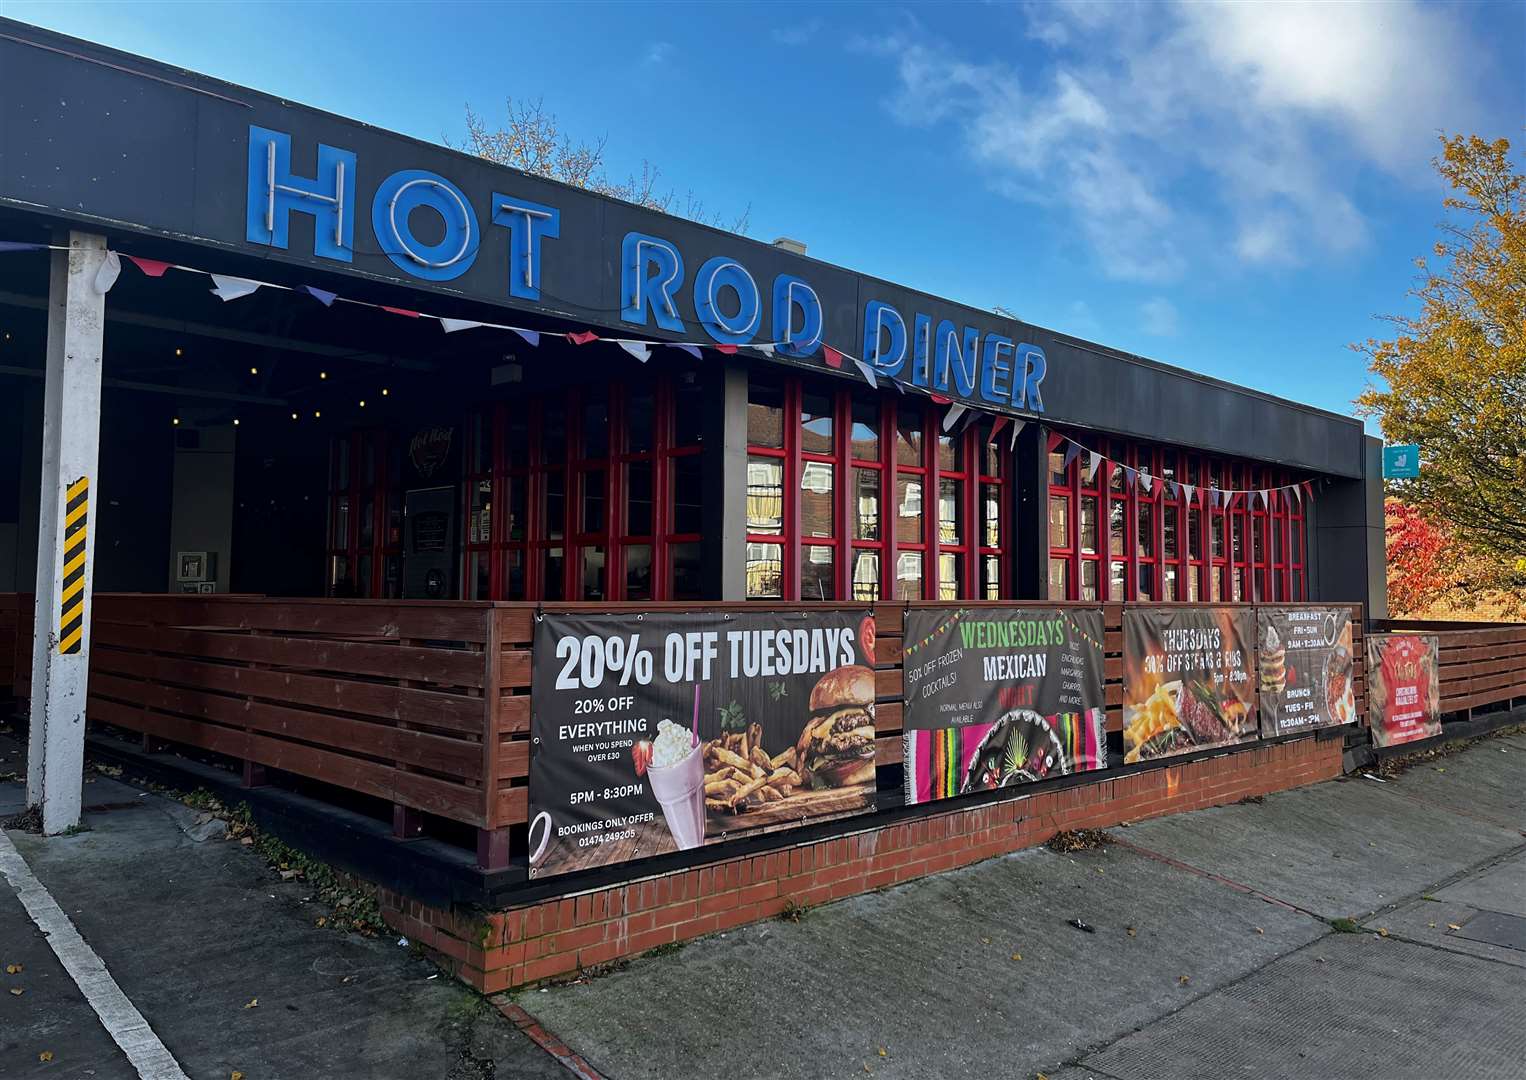 Hot Rod Diner in High Street, Northfleet is struggling since the collapse of Galley Hill Road